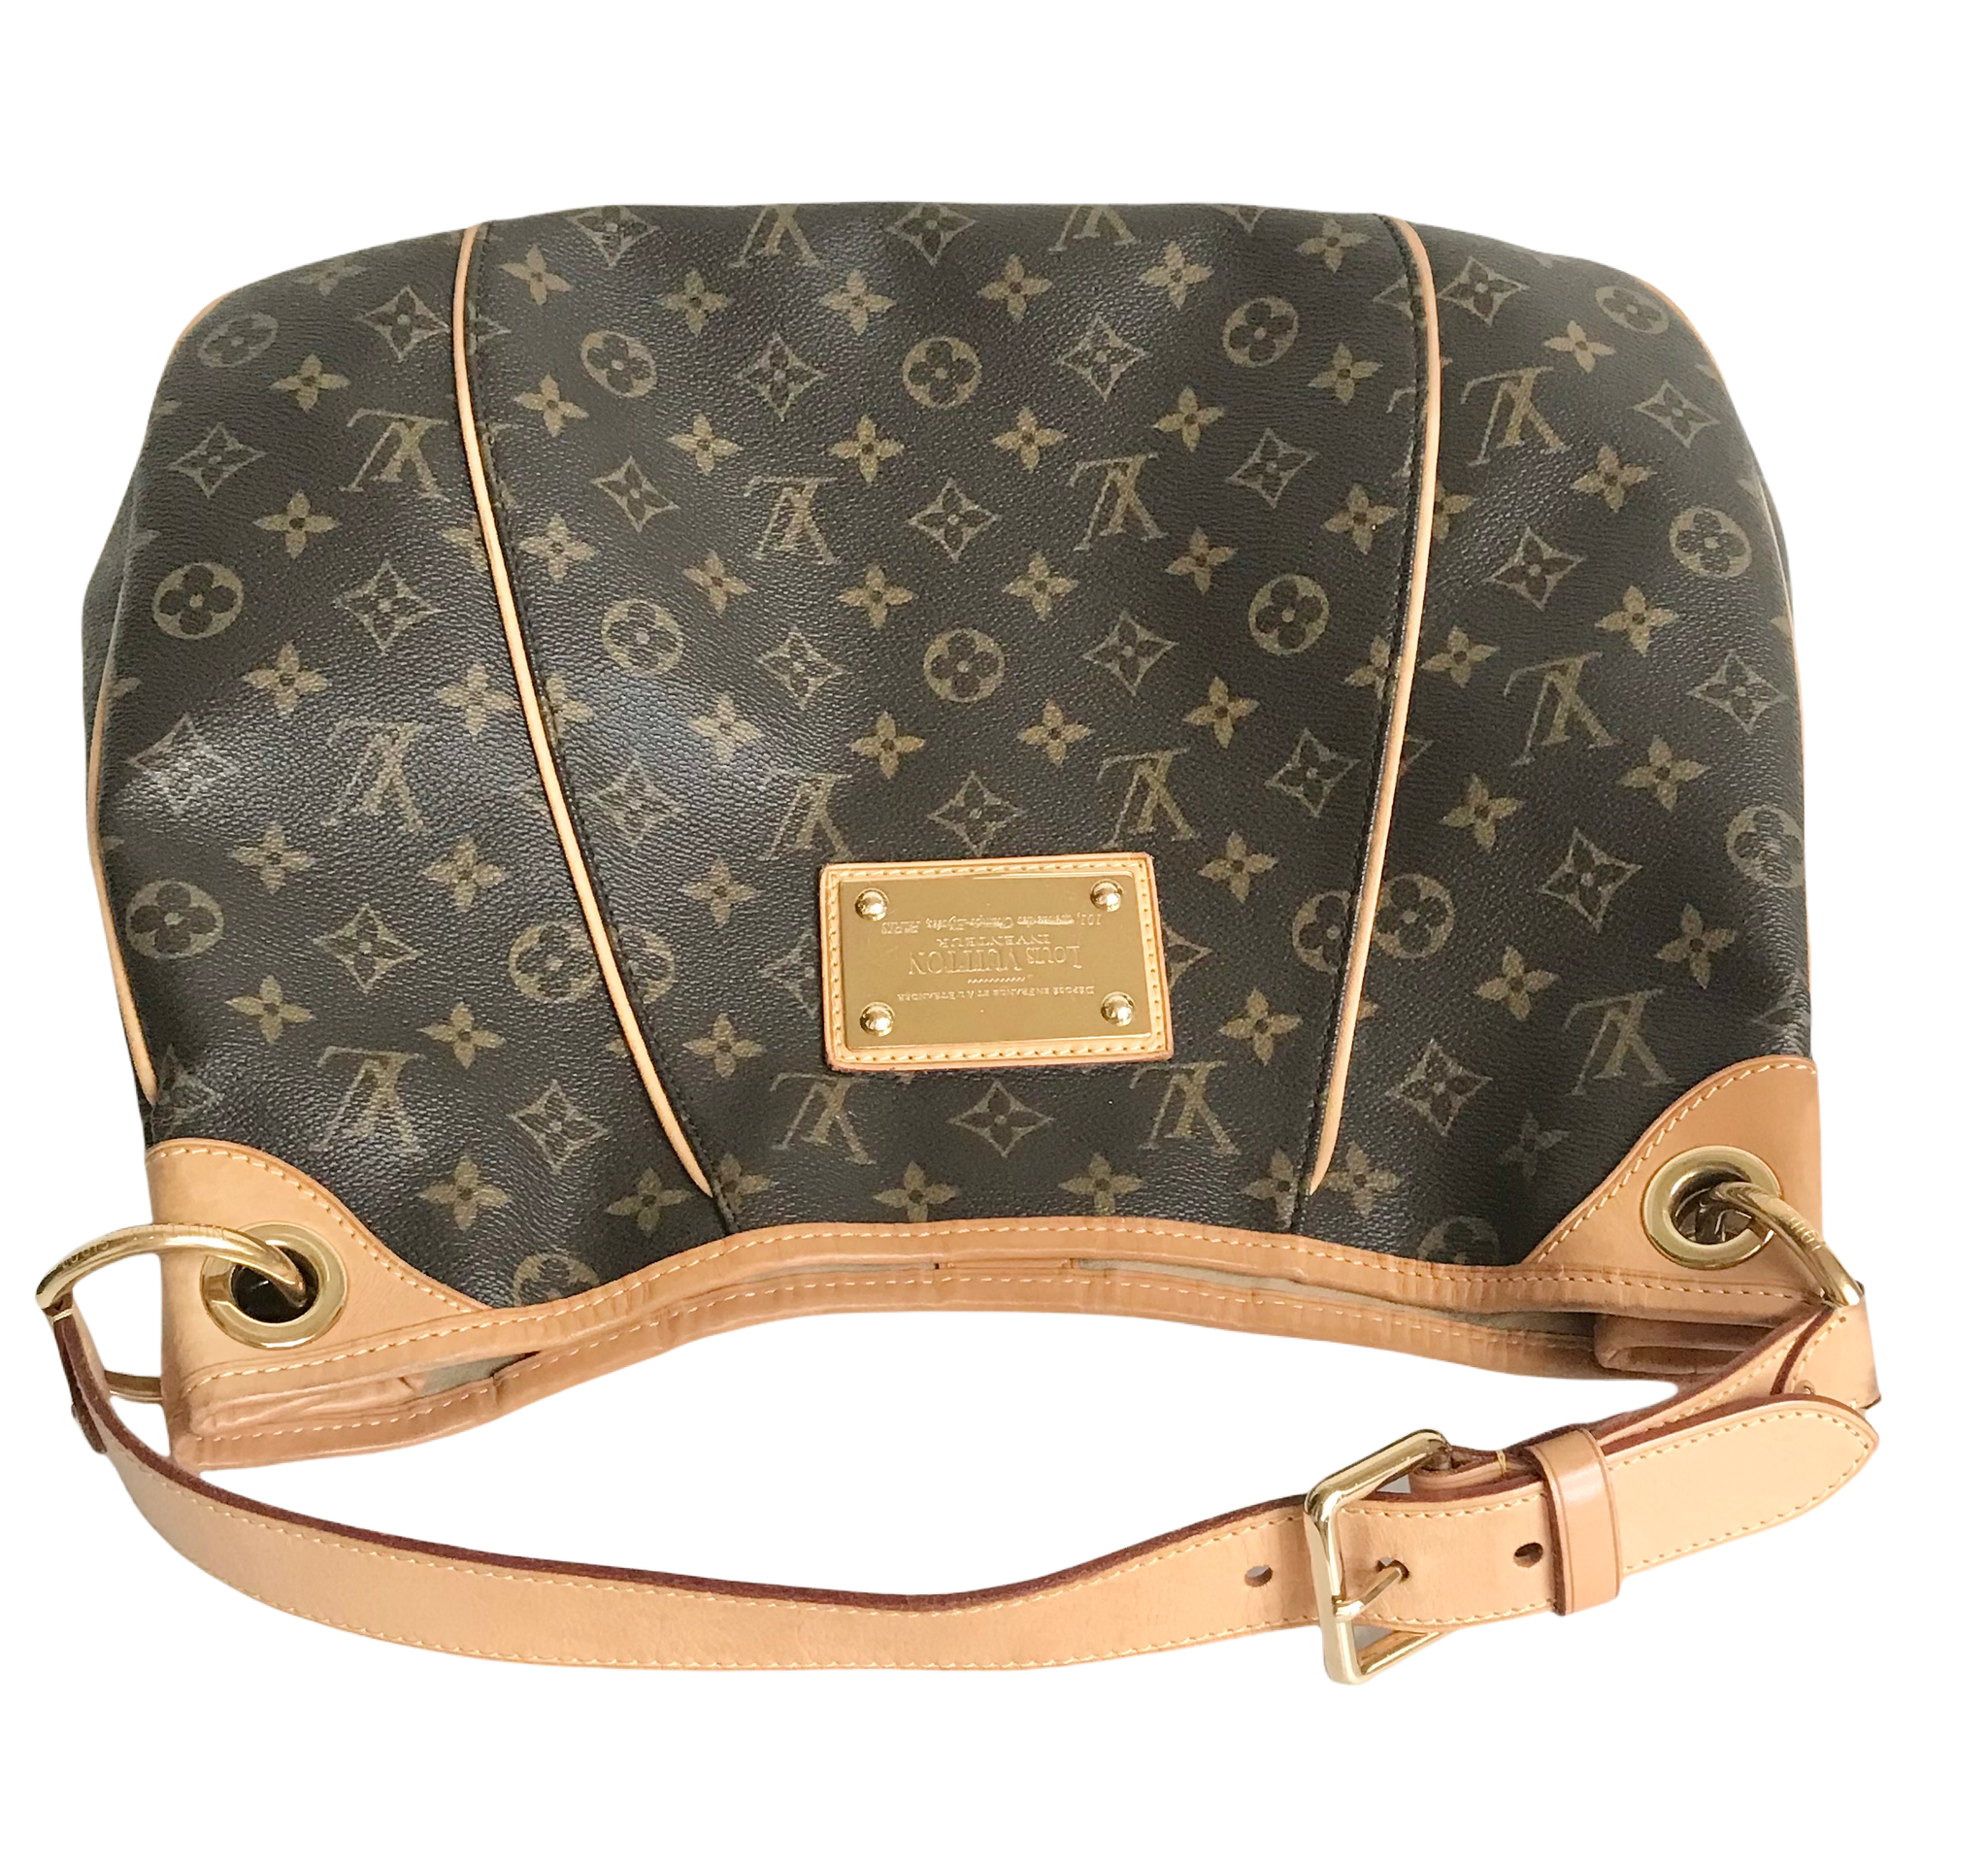 Authentic Louis Vuitton Galliera Bag pre owned